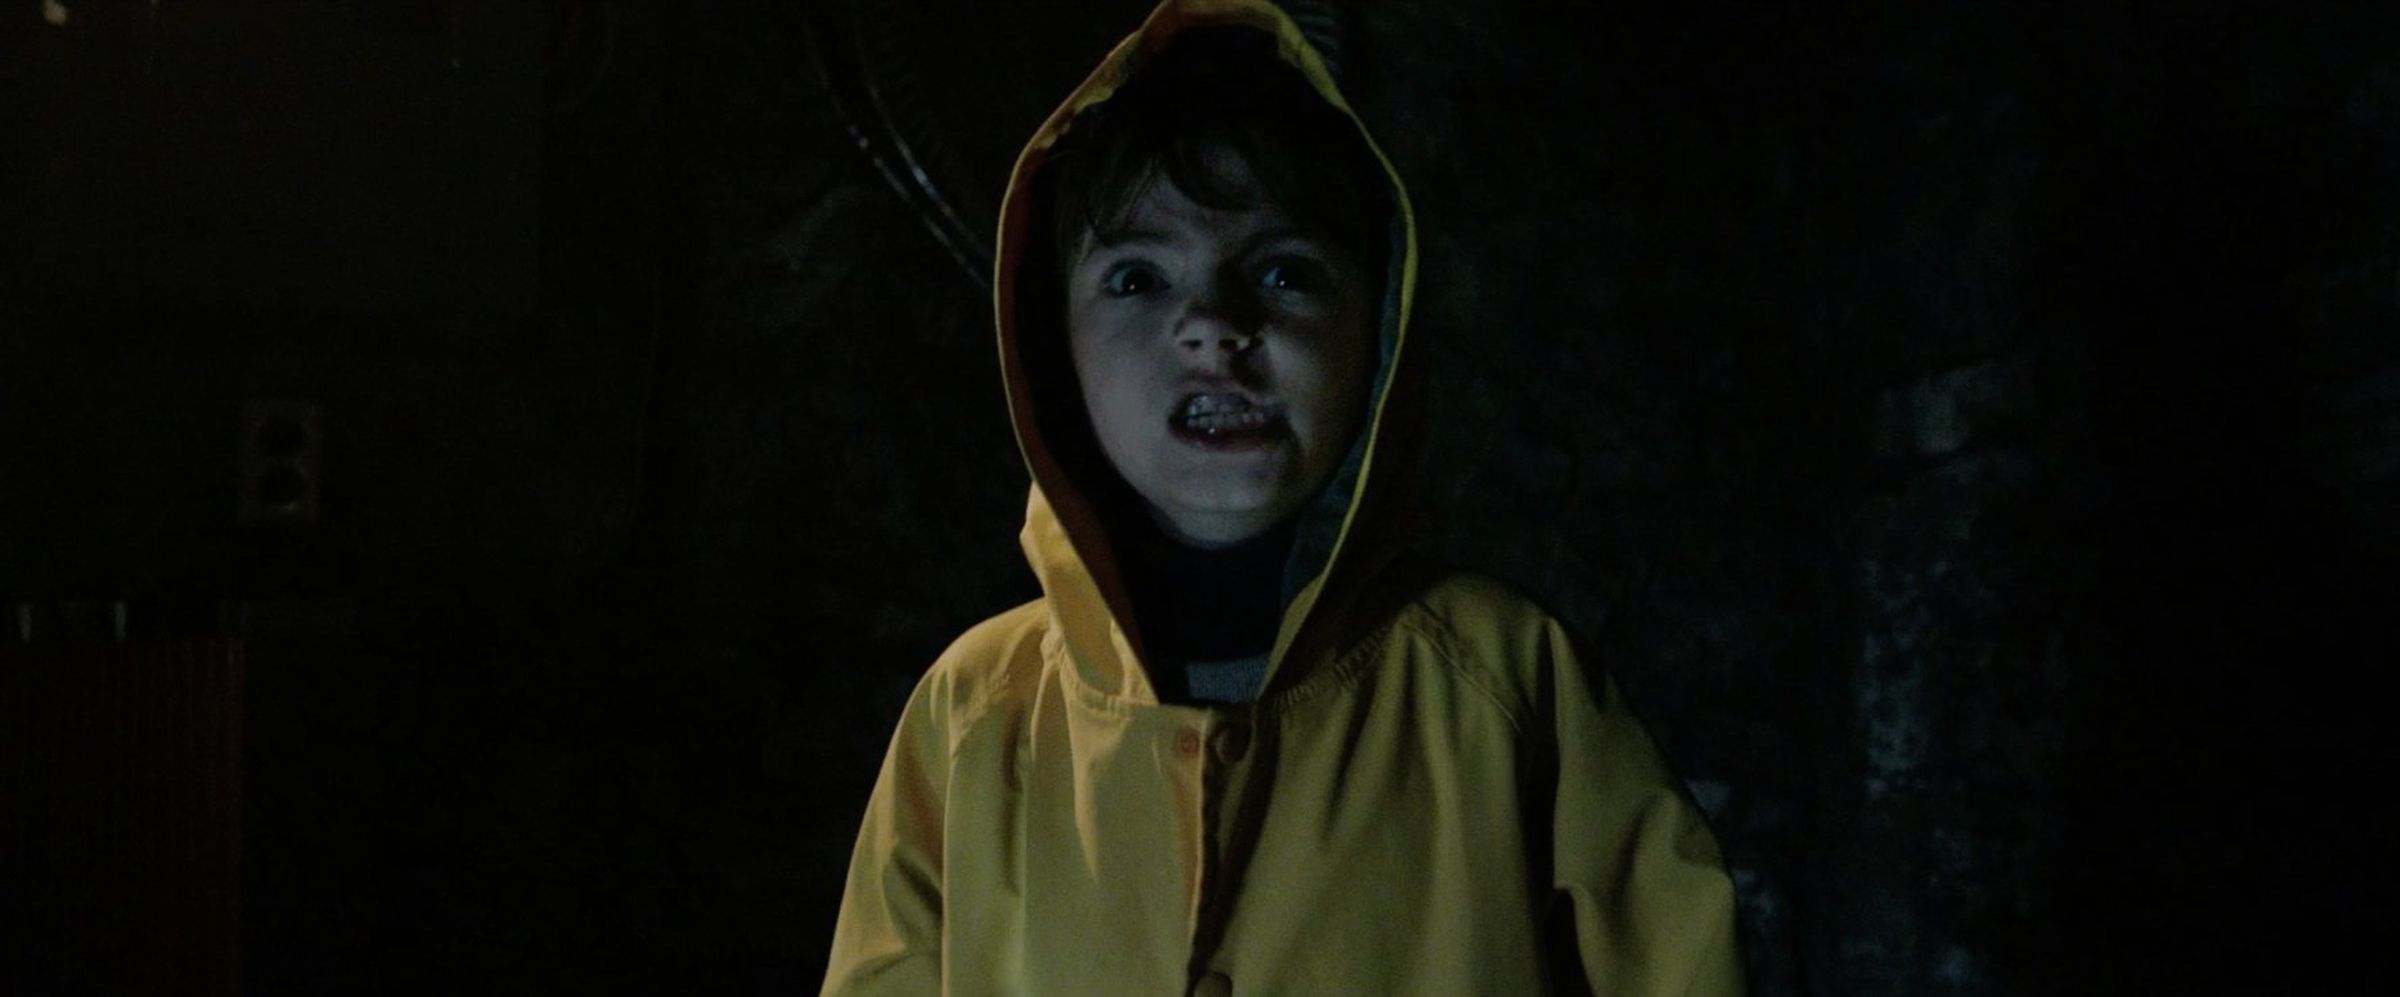 A little ridiculous that I didn’t realize this kid was a ghost in the trailer.